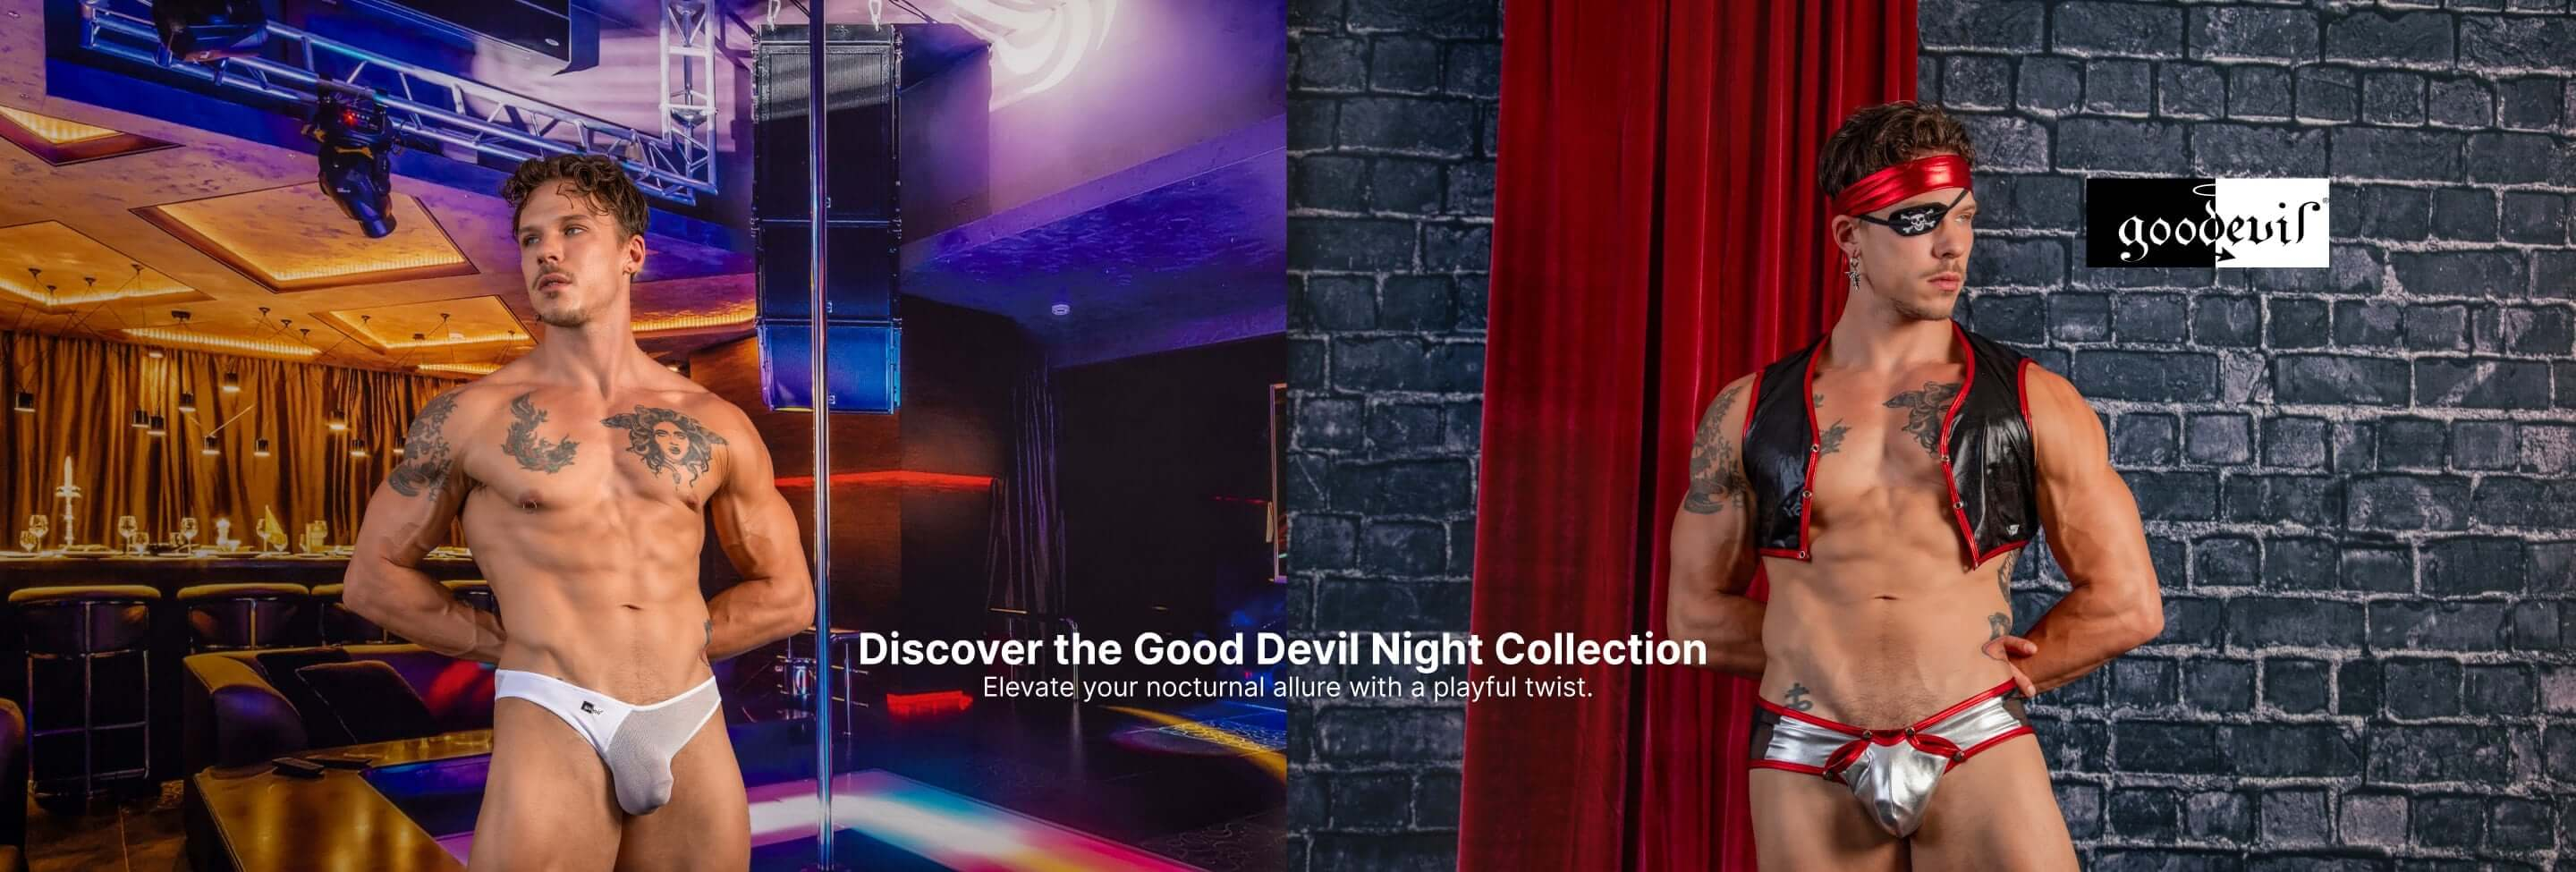 Good Devil Night Collection Banner